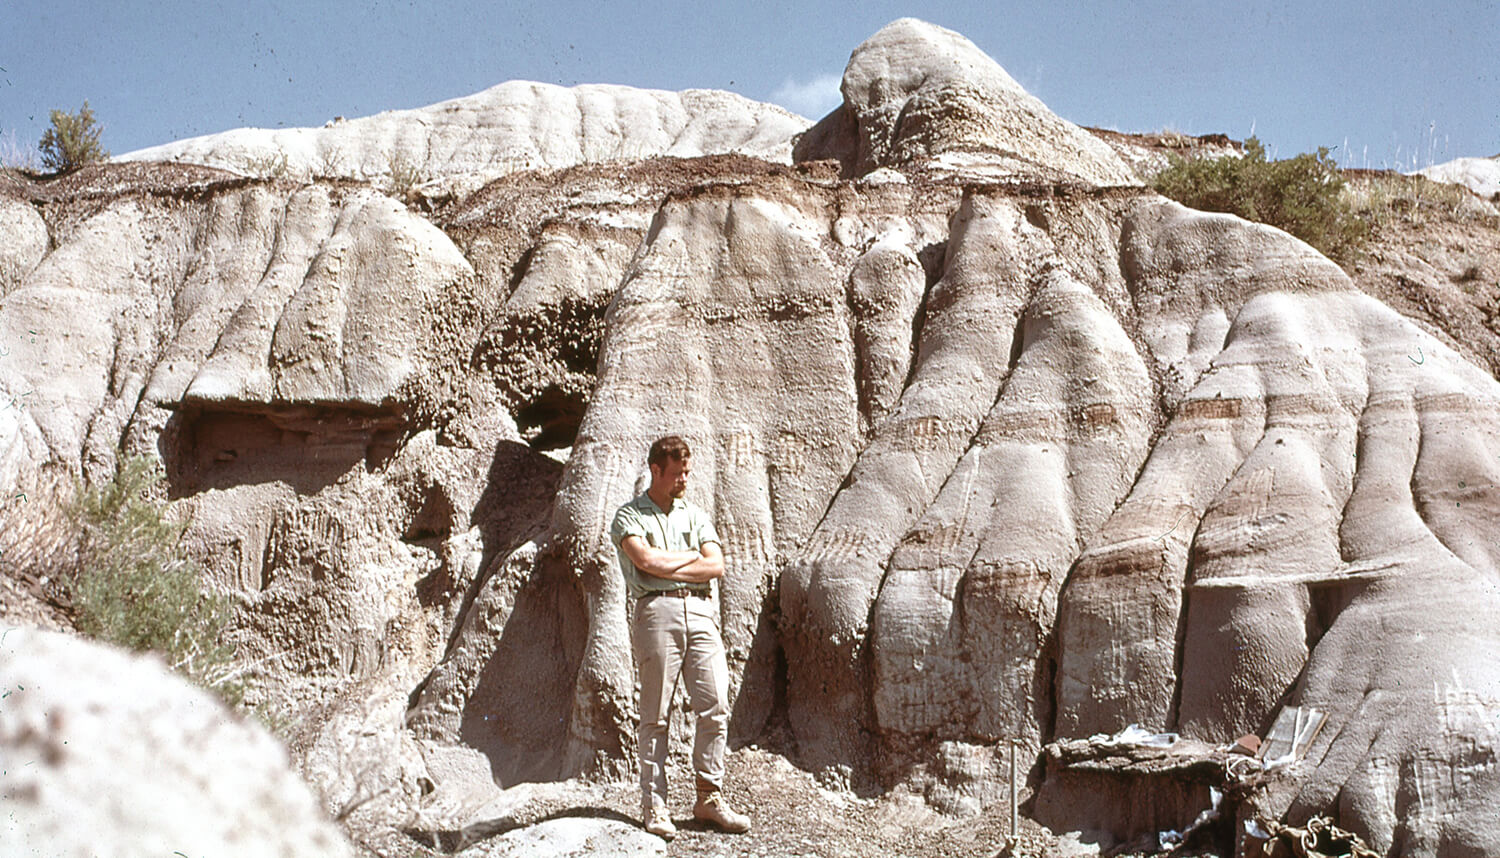 Alberta’s Dinosaur Provincial Park loomed large for Peter Dodson, shown there as a student in the late 1960s. He completed research there for his master’s degree and has returned repeatedly for additional fieldwork during his career. (Image: Courtesy of Peter Dodson)